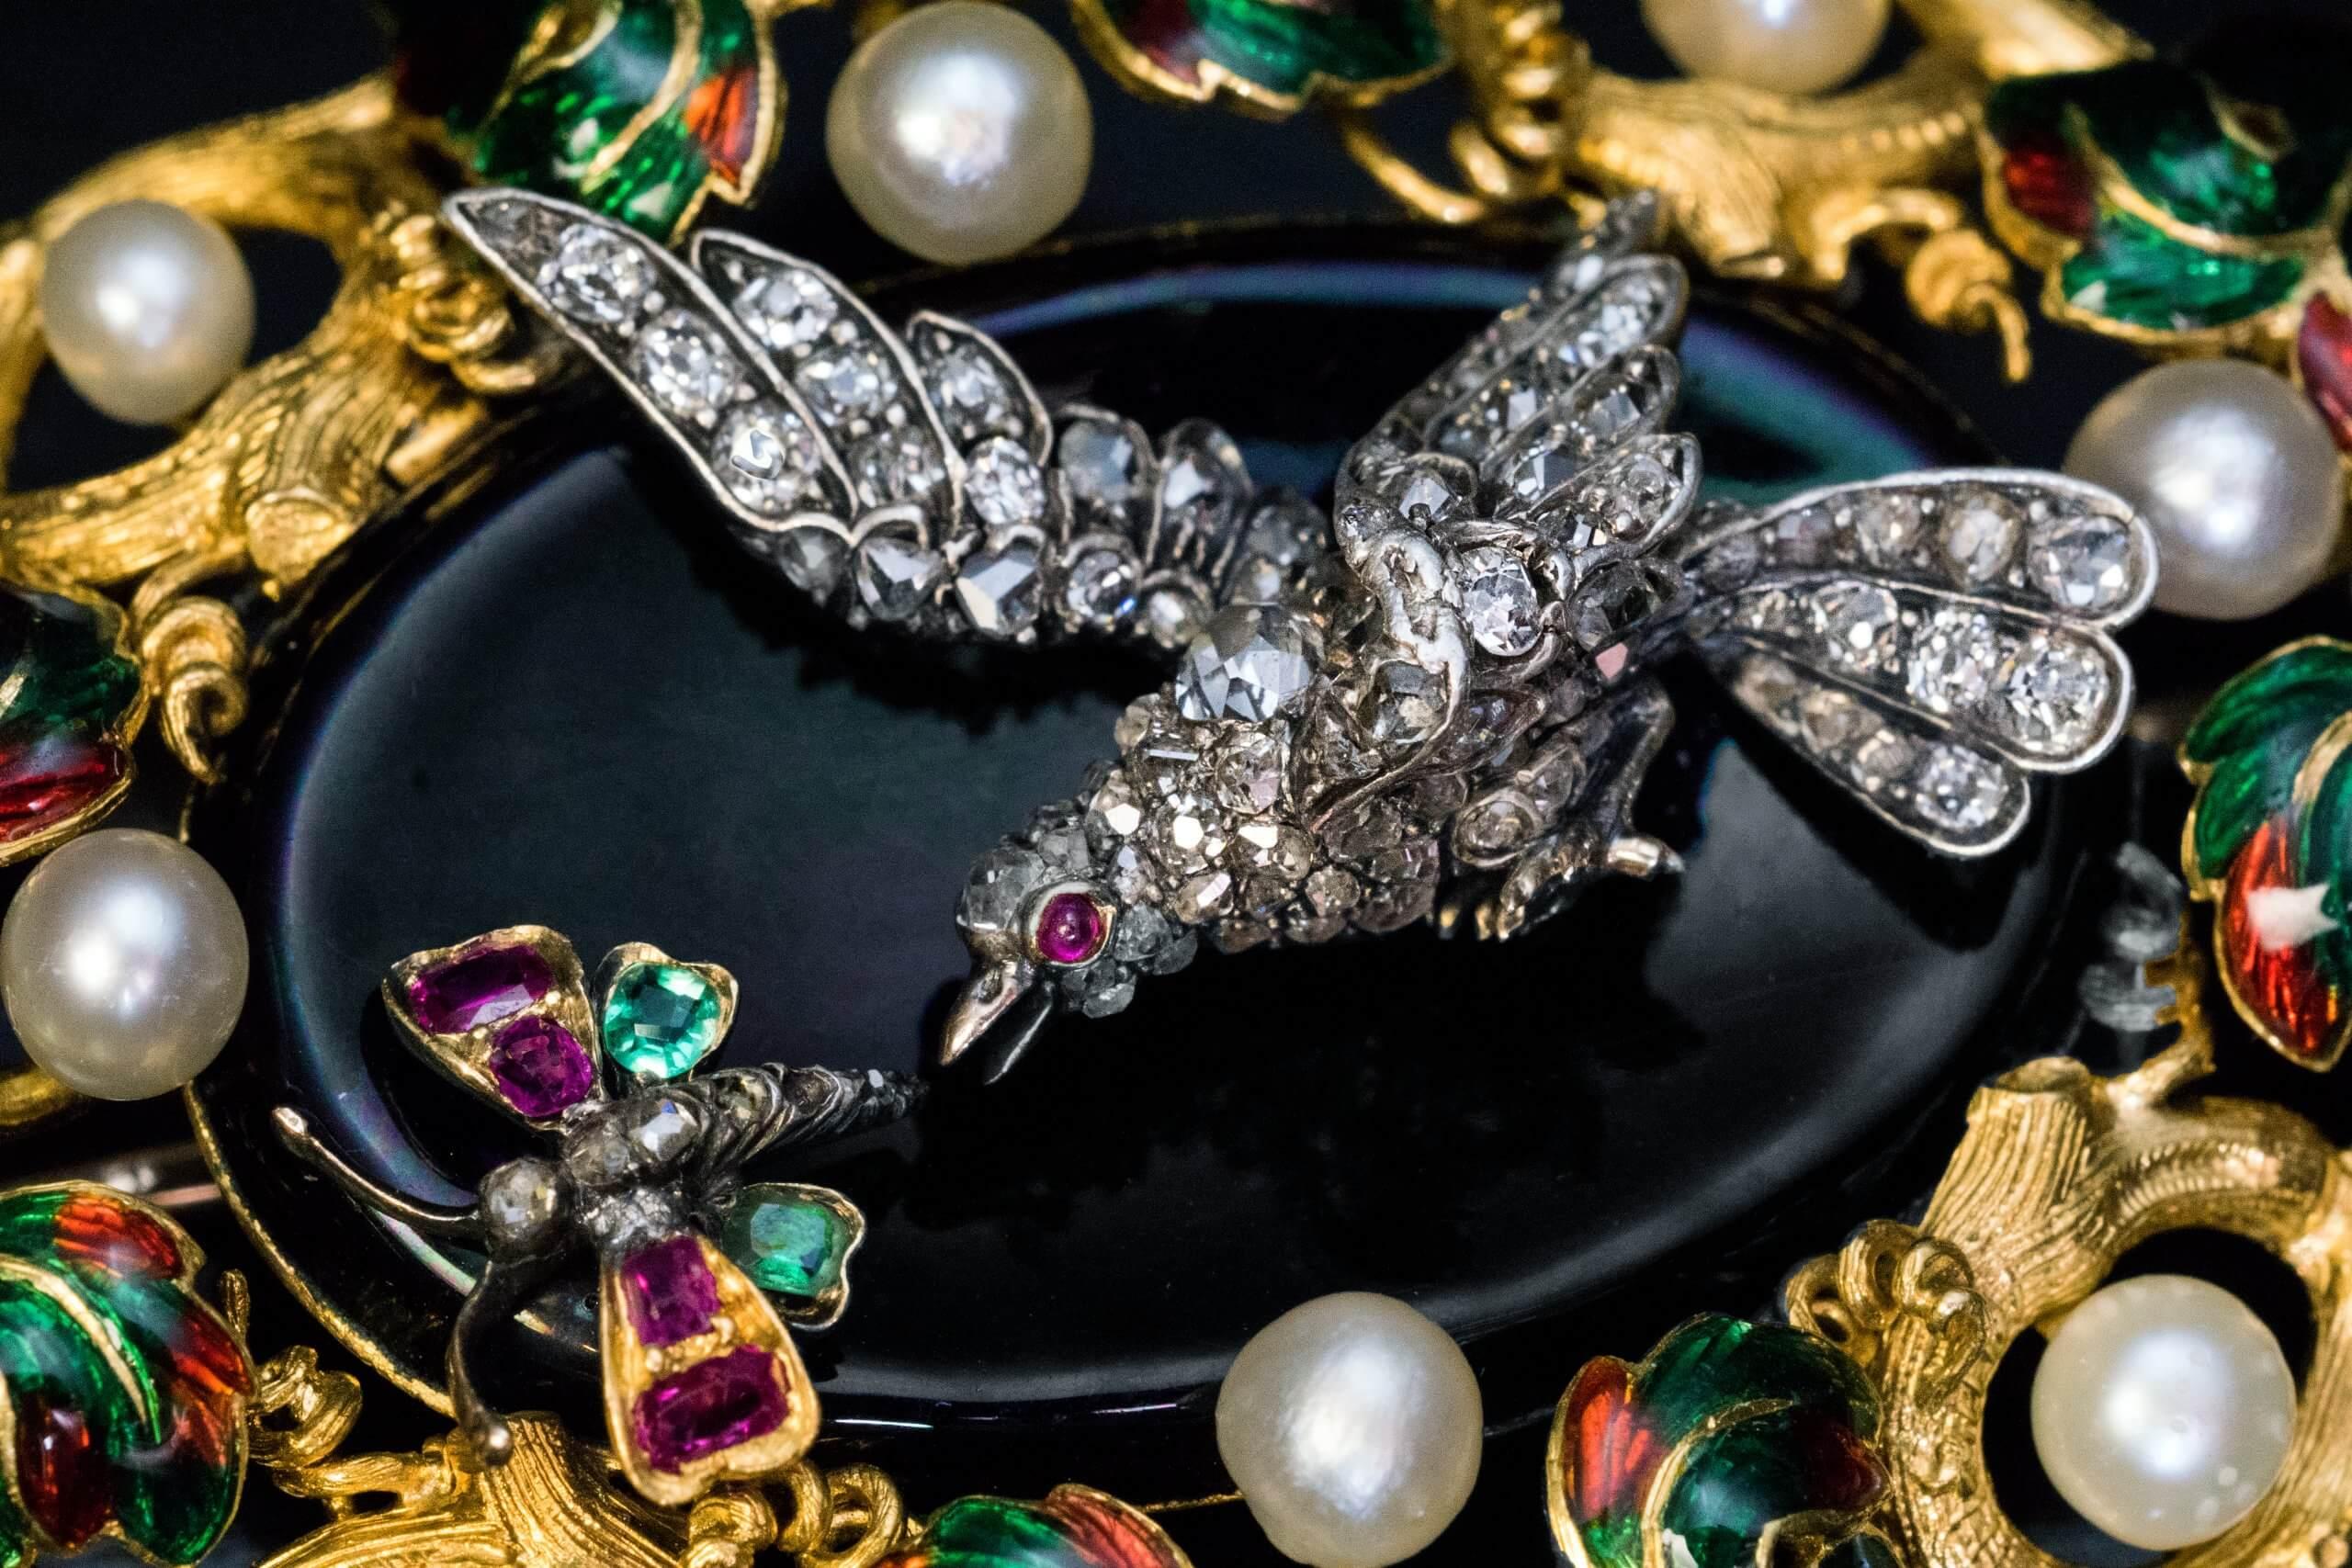 Circa 1840s, most likely French.  This ornate 18K gold antique brooch is centered with a black onyx plaque depicting, a scene of a bird chasing a butterfly. The bird is superbly modeled in silver with a gold beak and eye. The body of the bird is